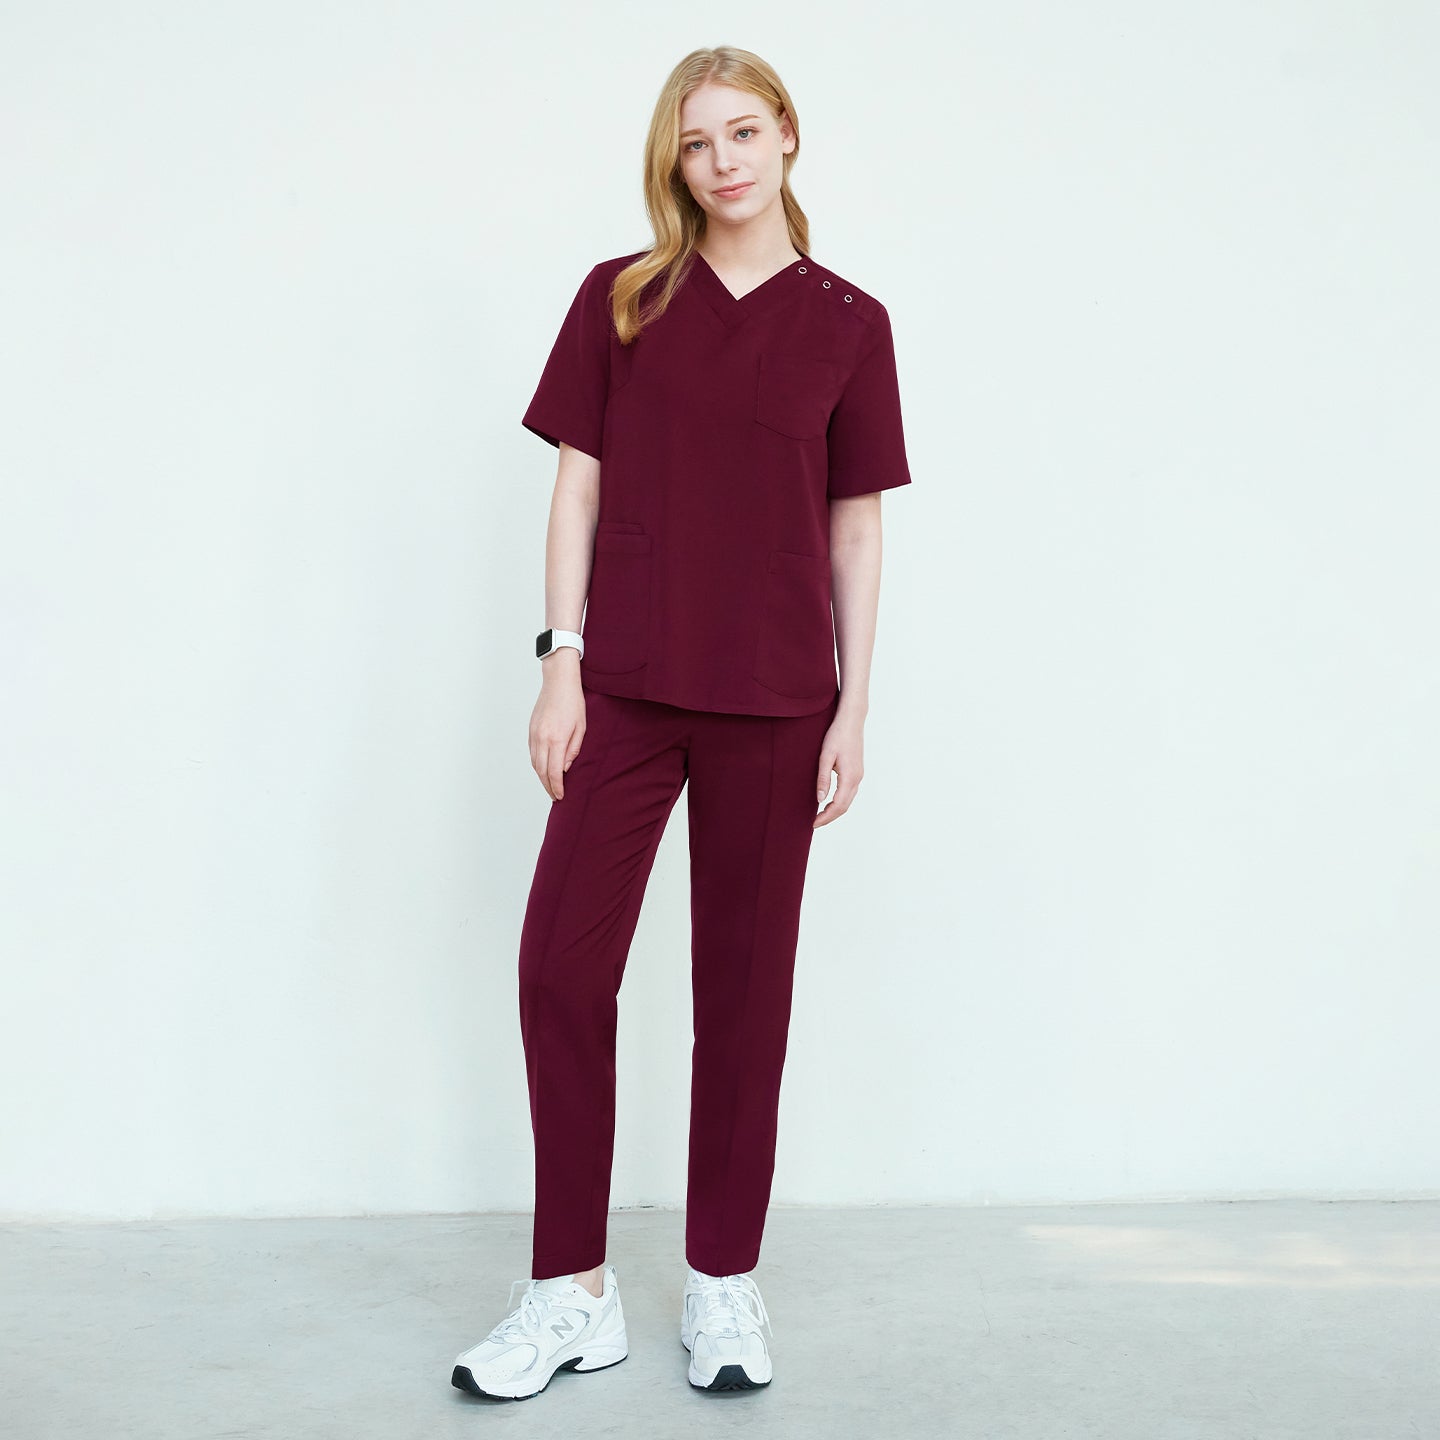 Burgundy Line Banding Scrub Pants, full-body view, featuring a matching V-neck scrub top with front pockets and button details, paired with white sneakers,Burgundy